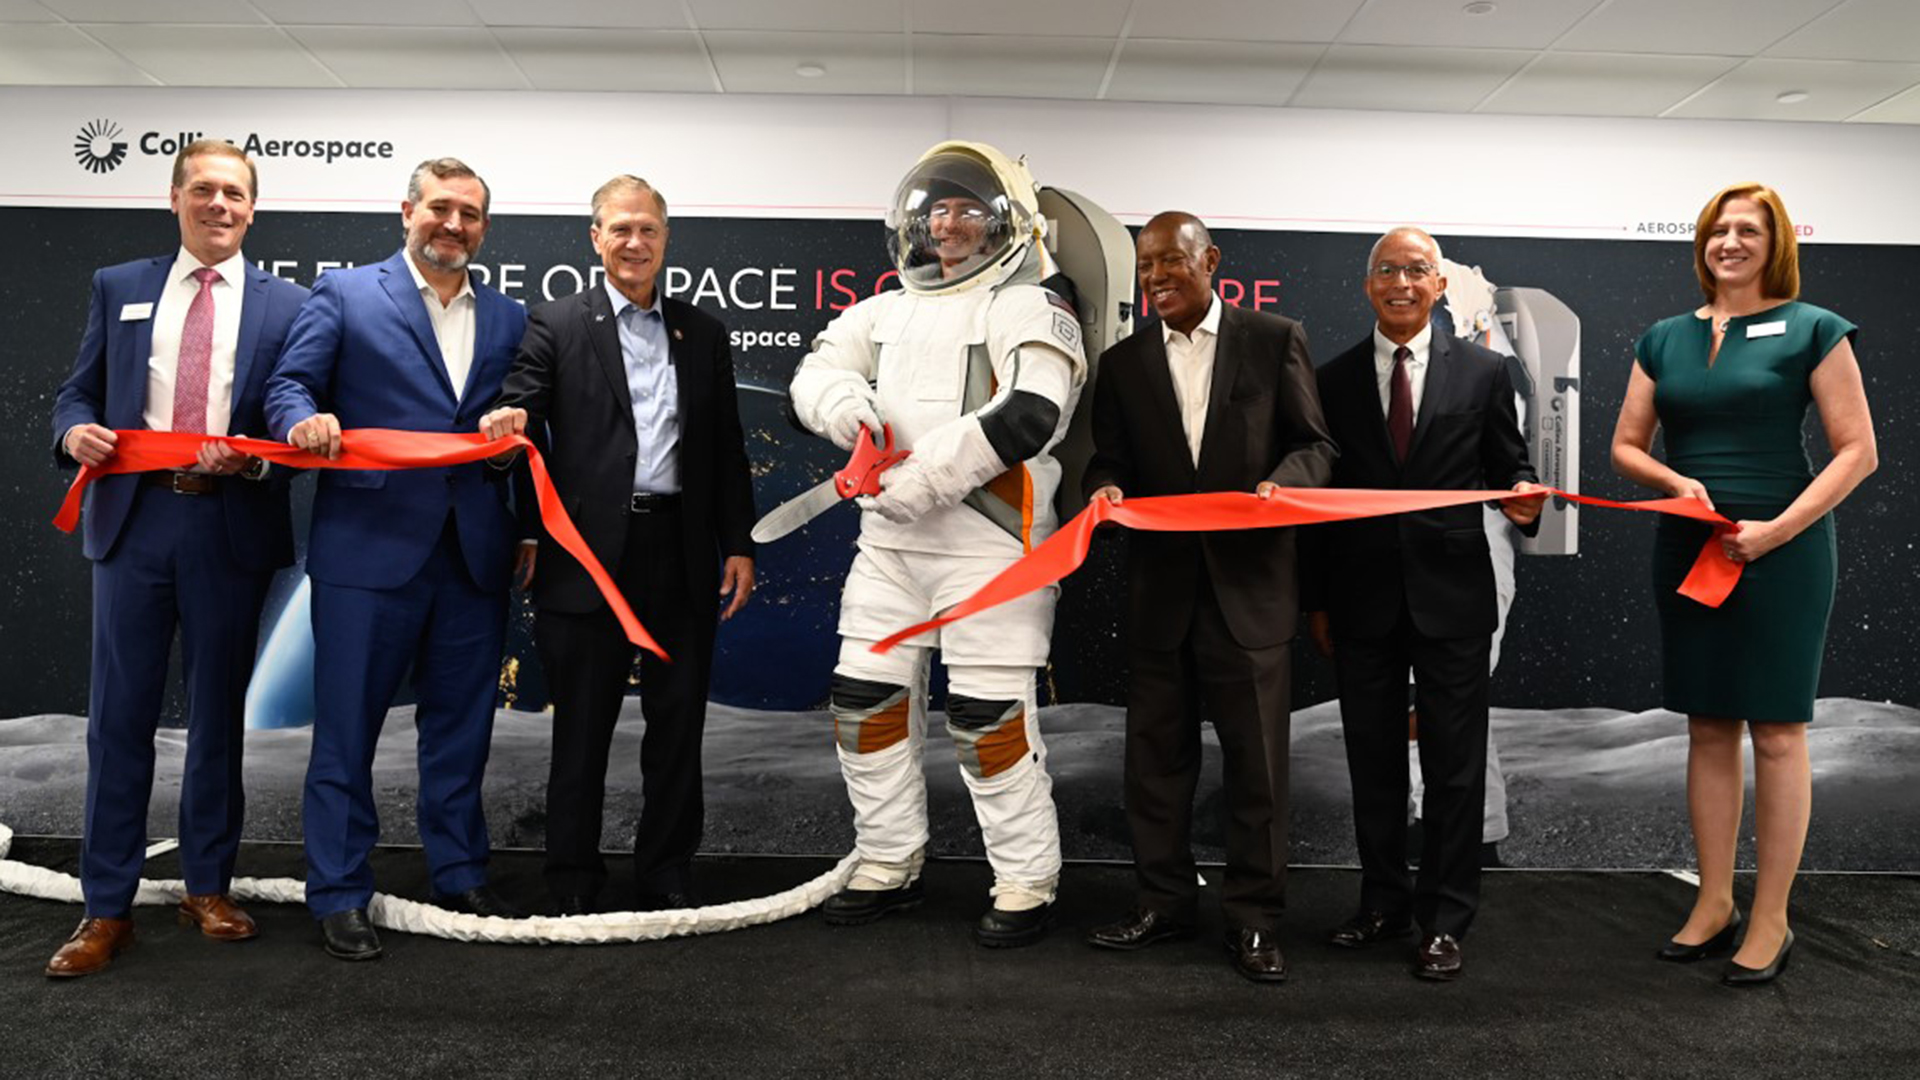 Collins Aerospace opens new facility at Houston Spaceport